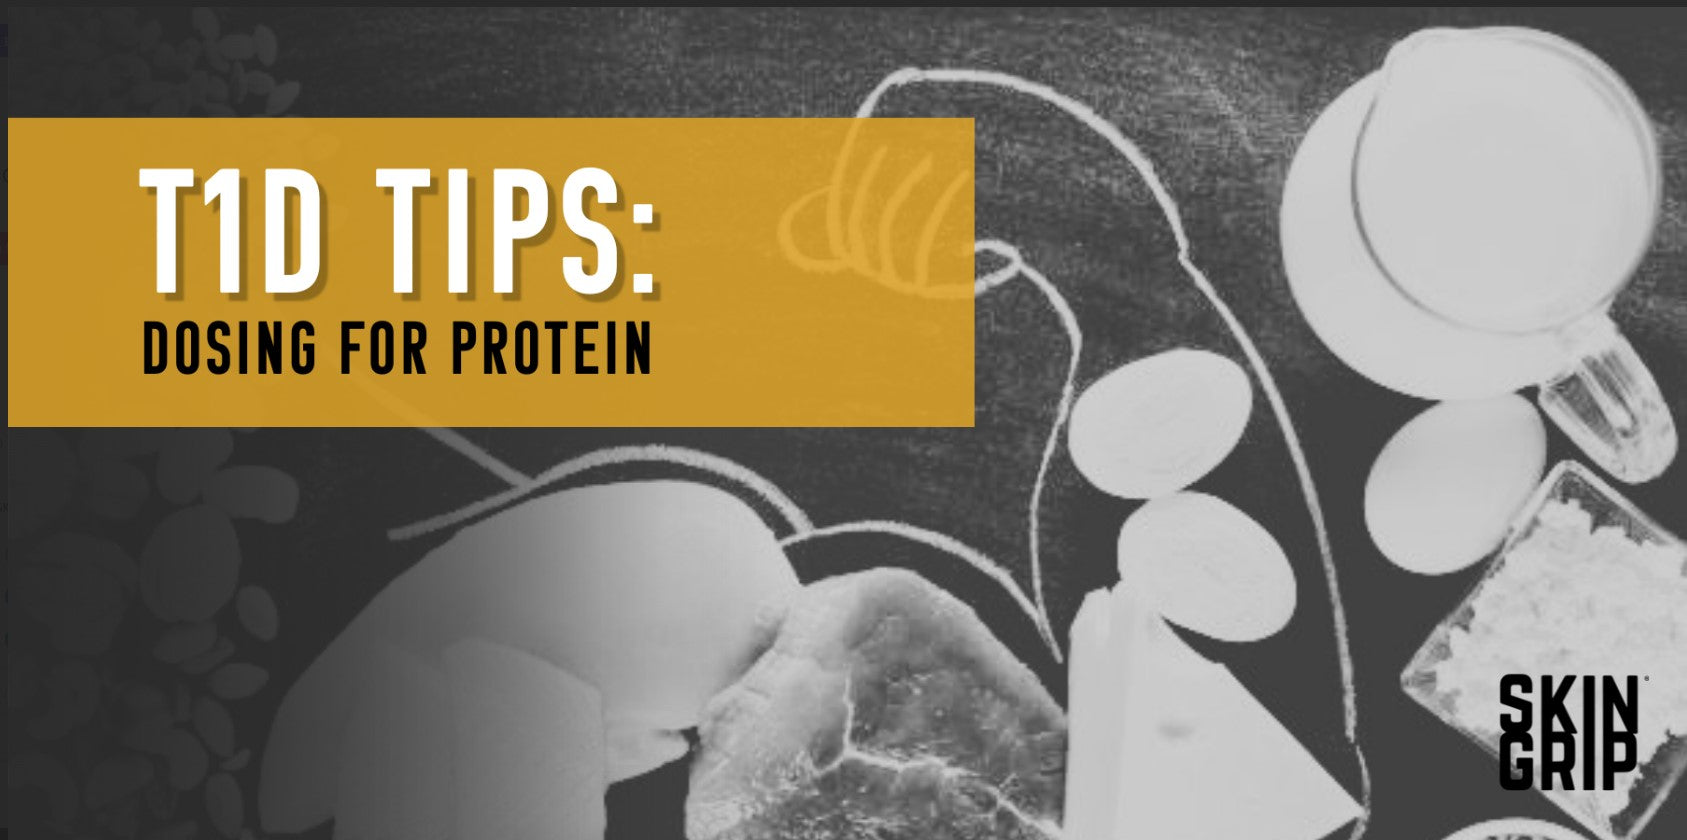 Dosing for Protein 